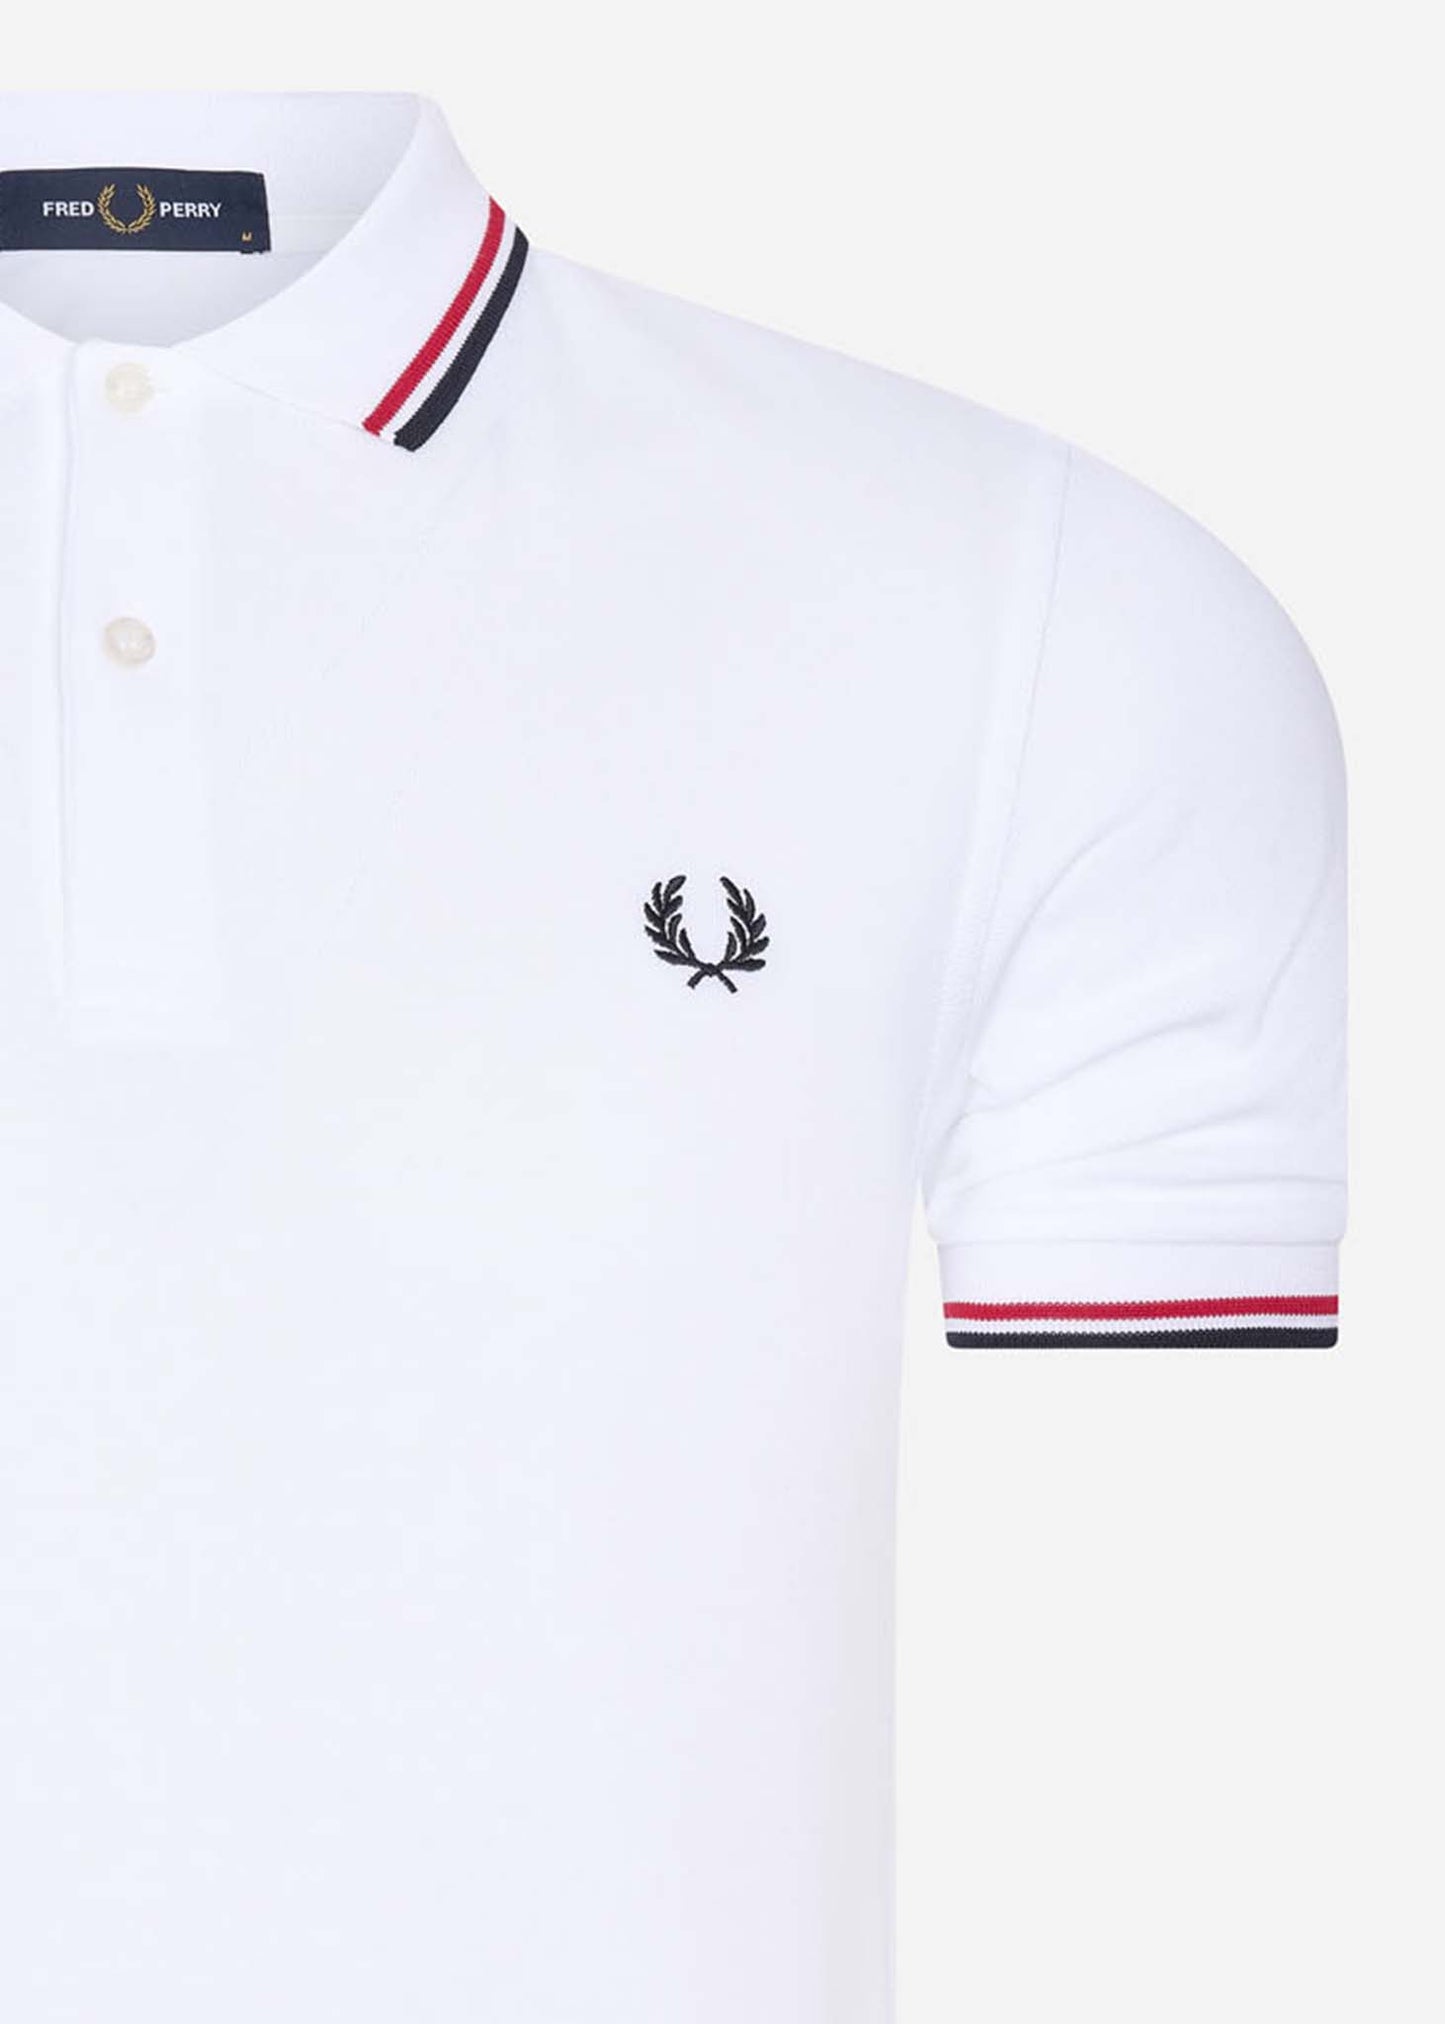 Twin tipped fred perry shirt - white bright red navy